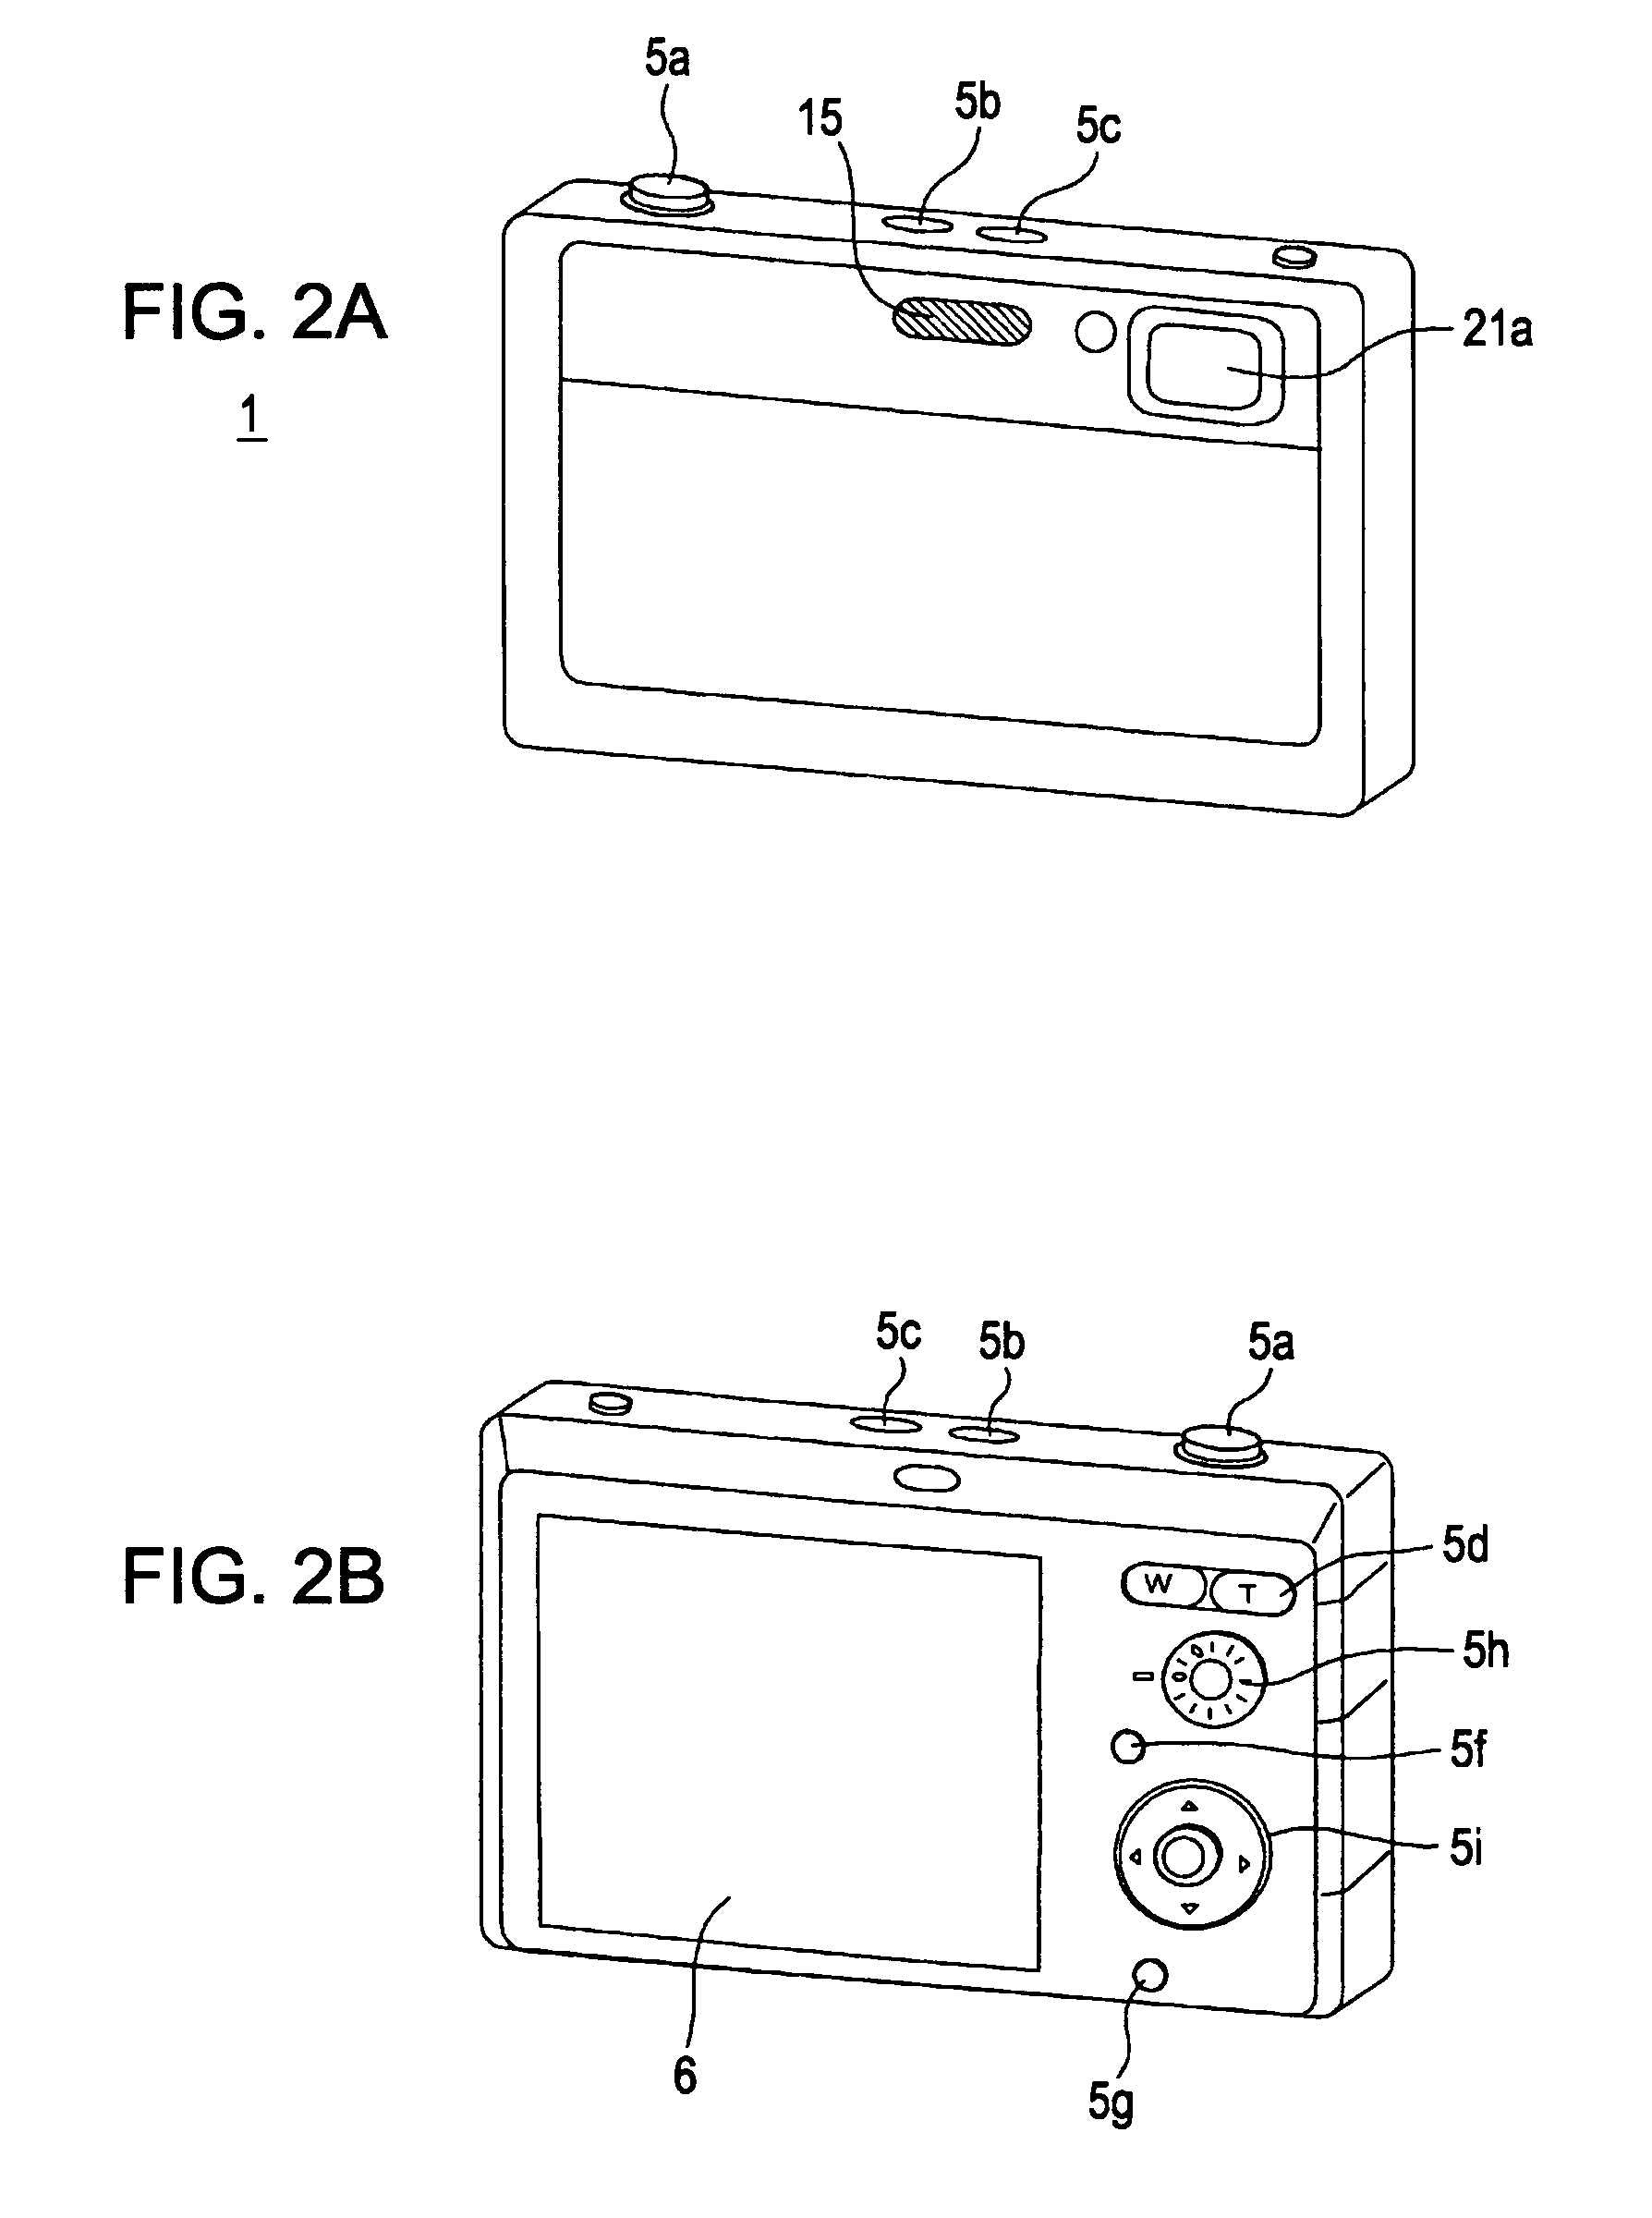 Image processing apparatus, and method, for providing special effect